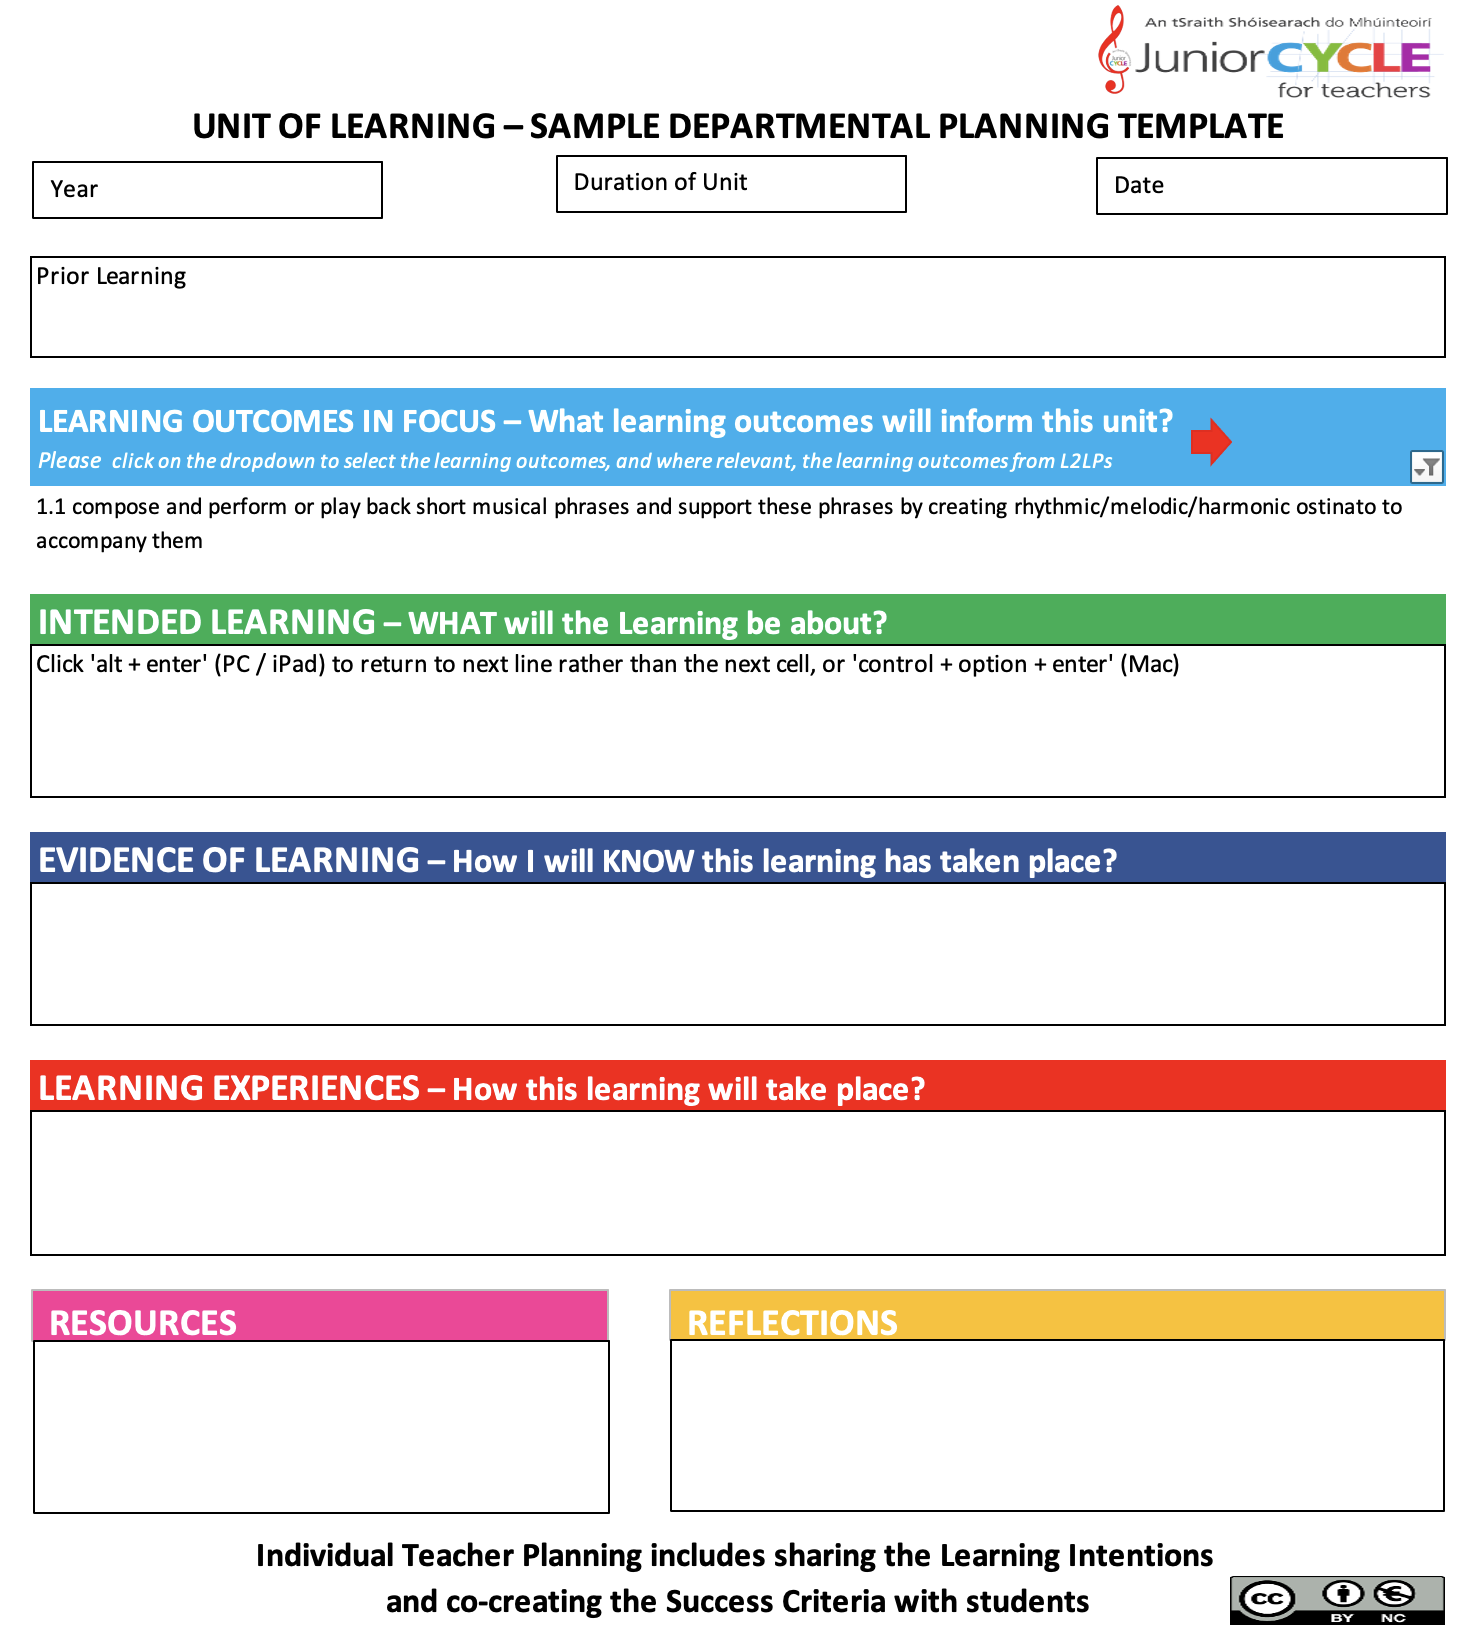 Sample Unit of Learning Planner (Sheets) INTERACTIVE